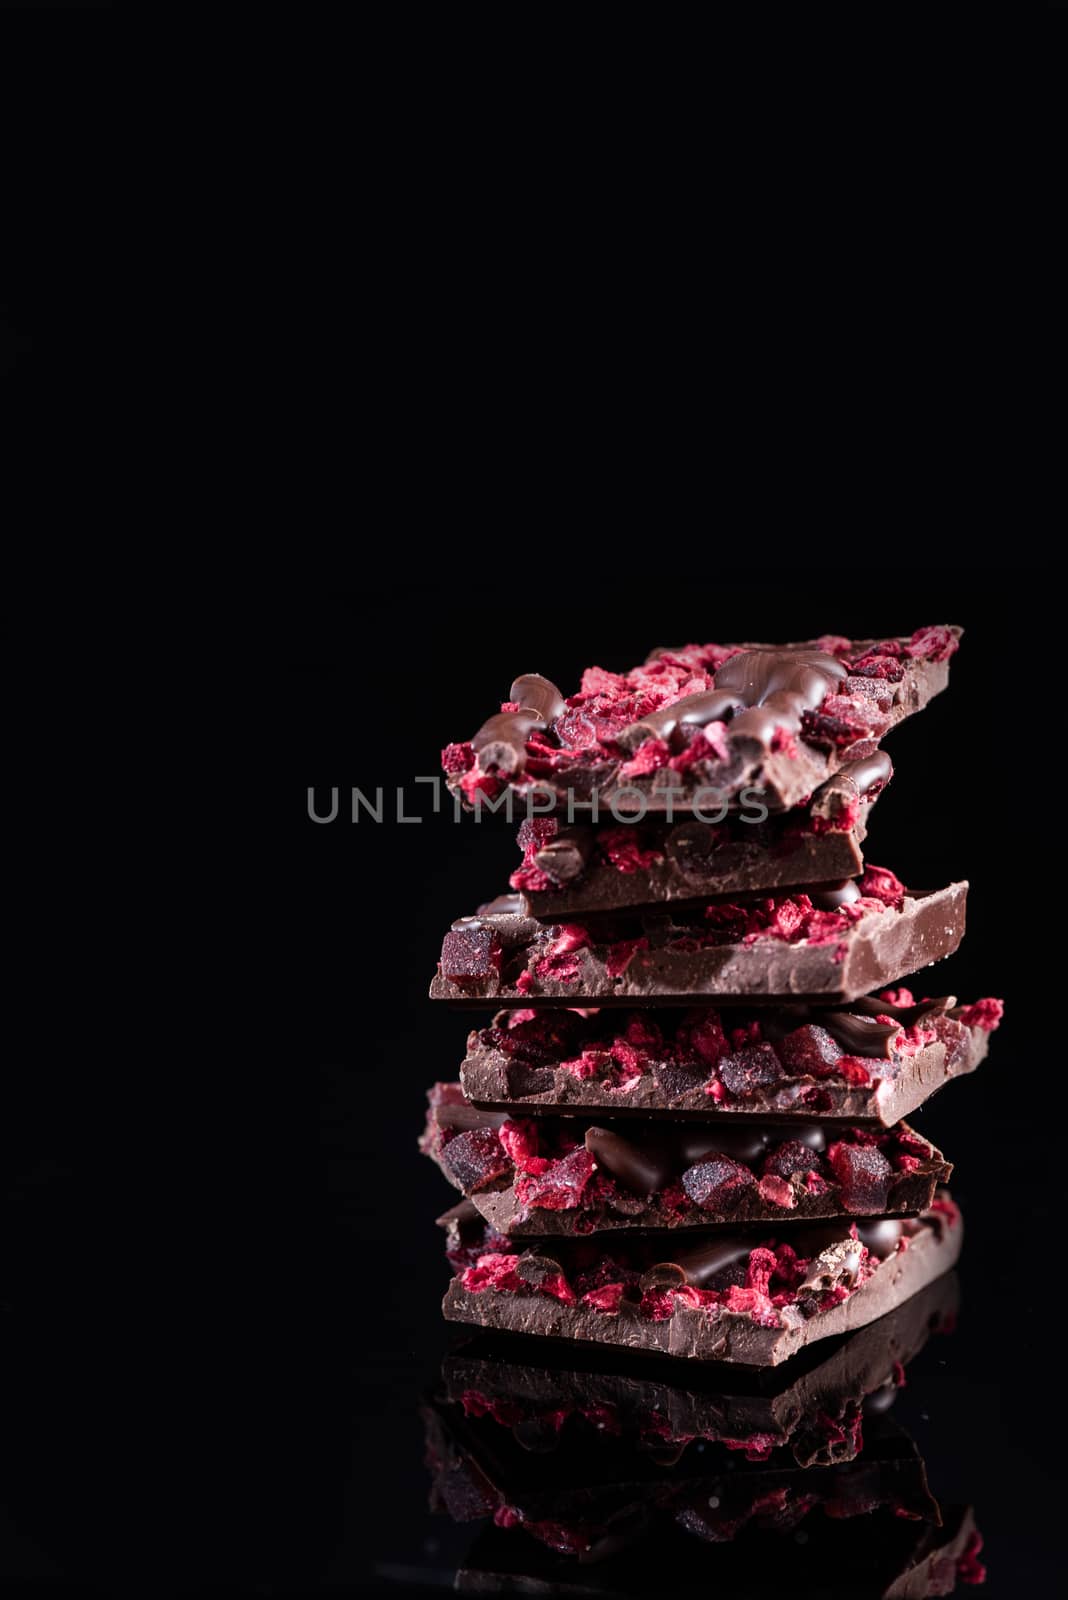 Stack of Broken Chocolate Pieces on Black Background. Copy Space by merc67